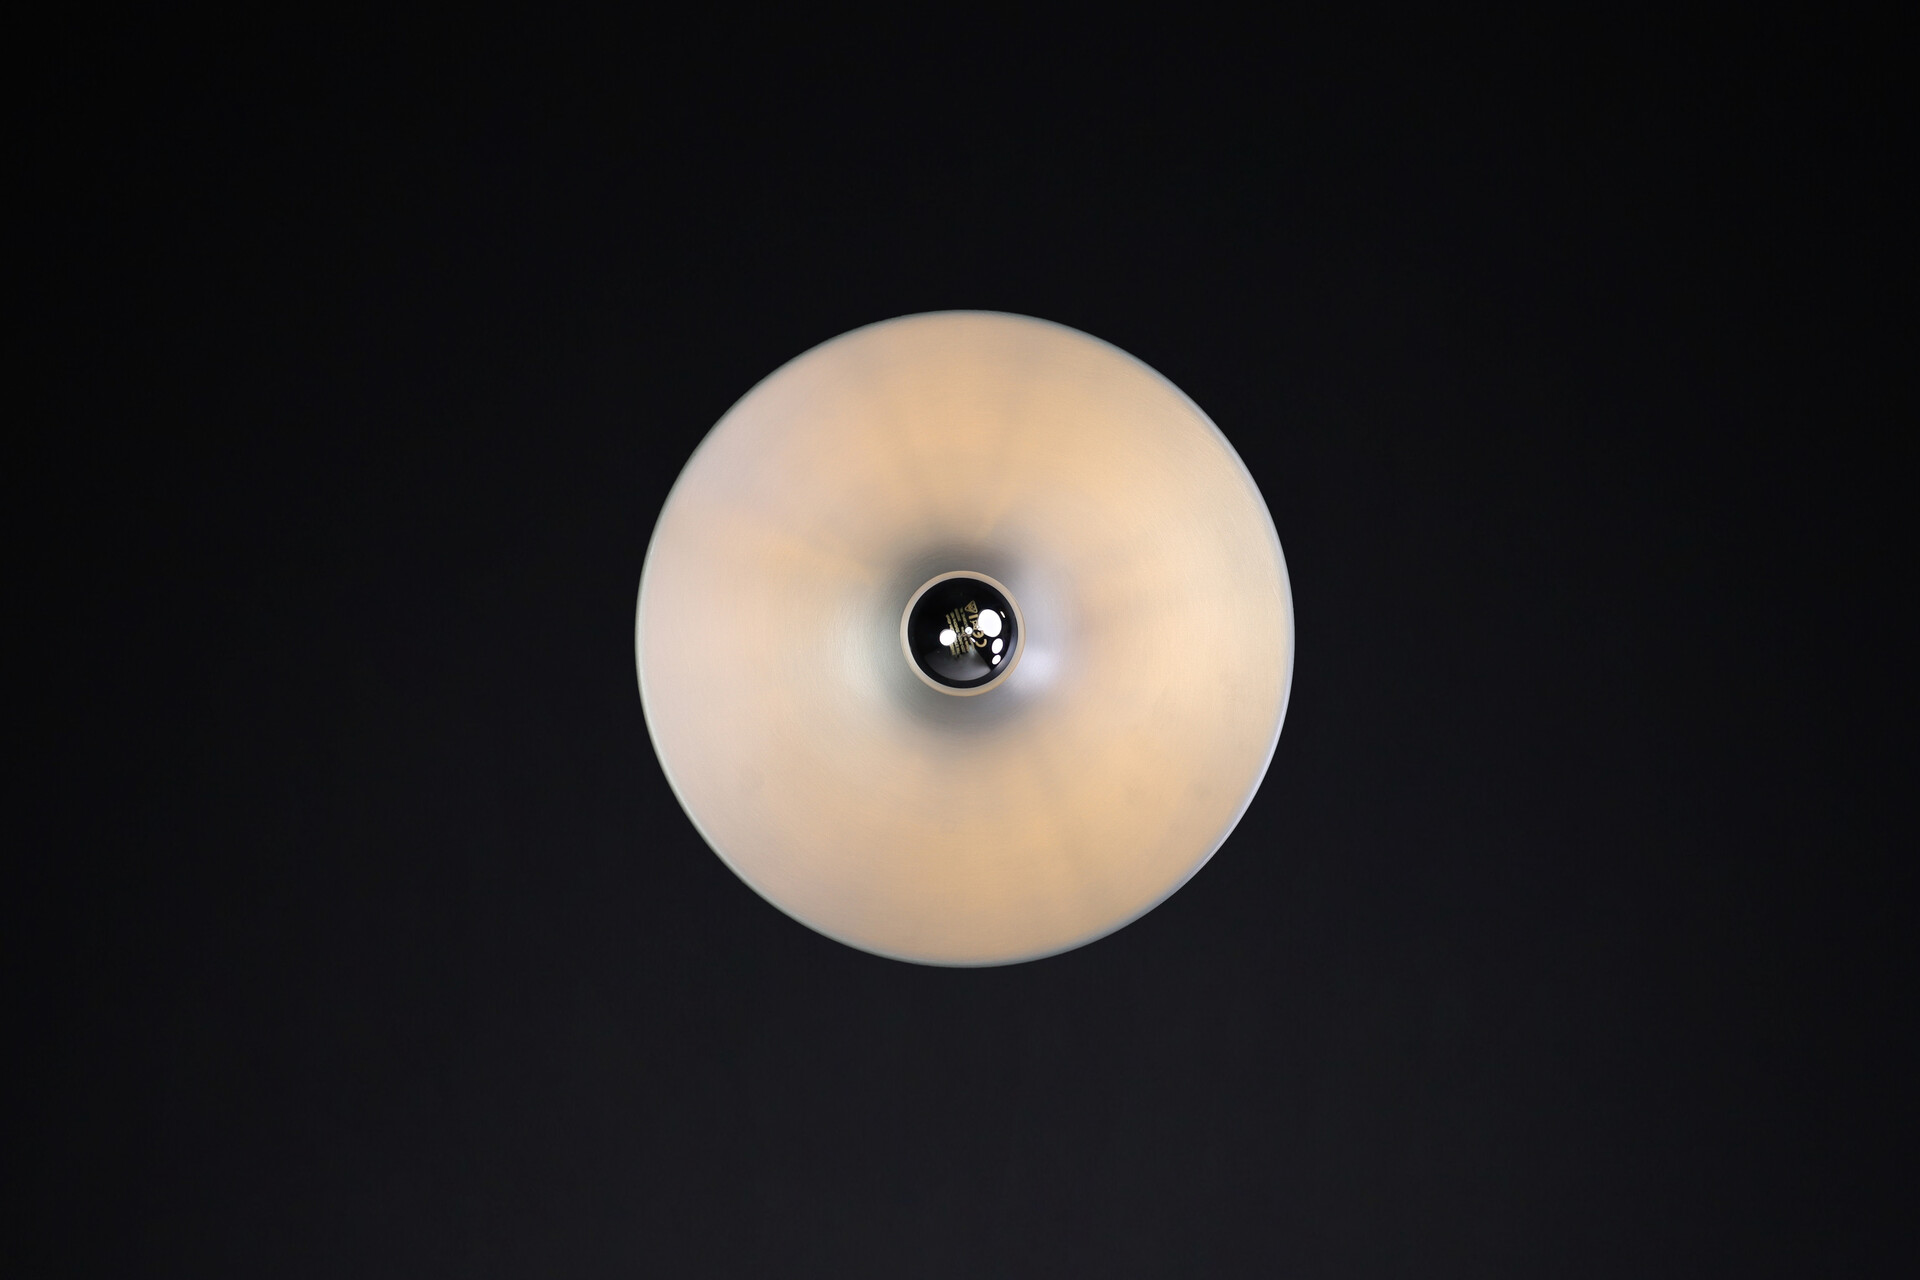 Mid century modern Charlotte Perriand Aluminum Disc Wall Lights, Germany 1960s Mid-20th century